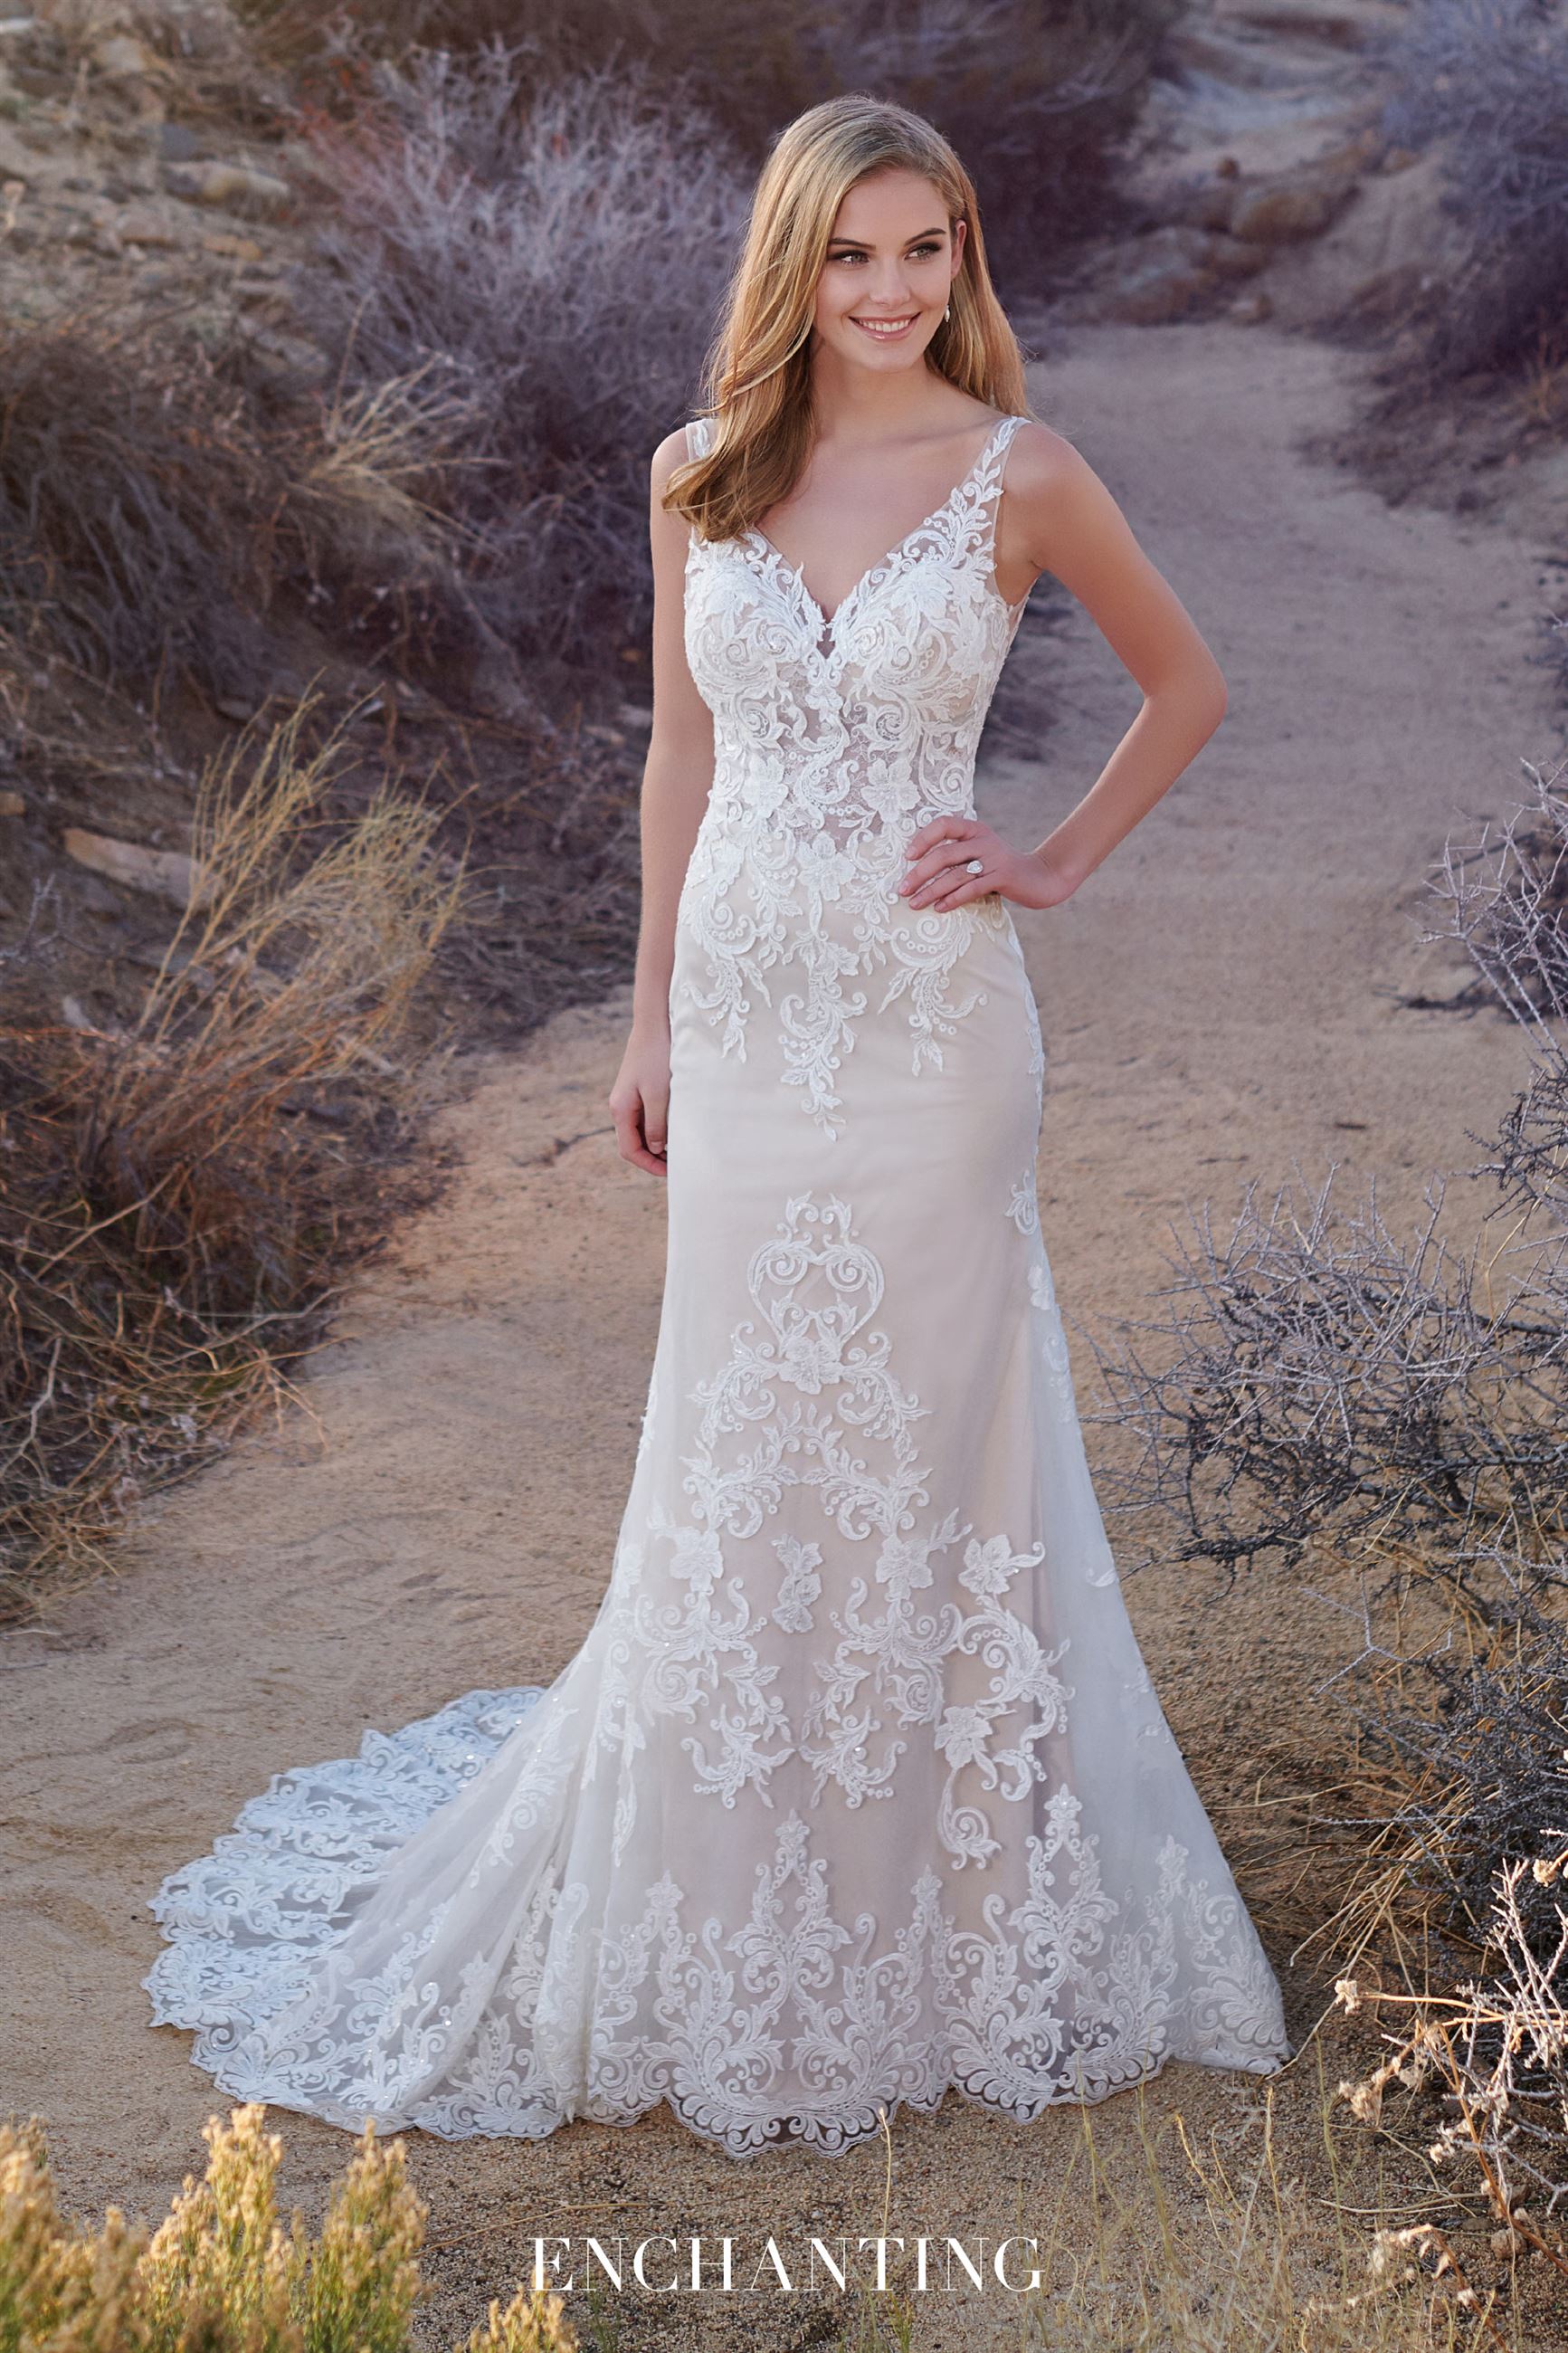 Bride wearing fit and flare wedding dress with lace embroidery